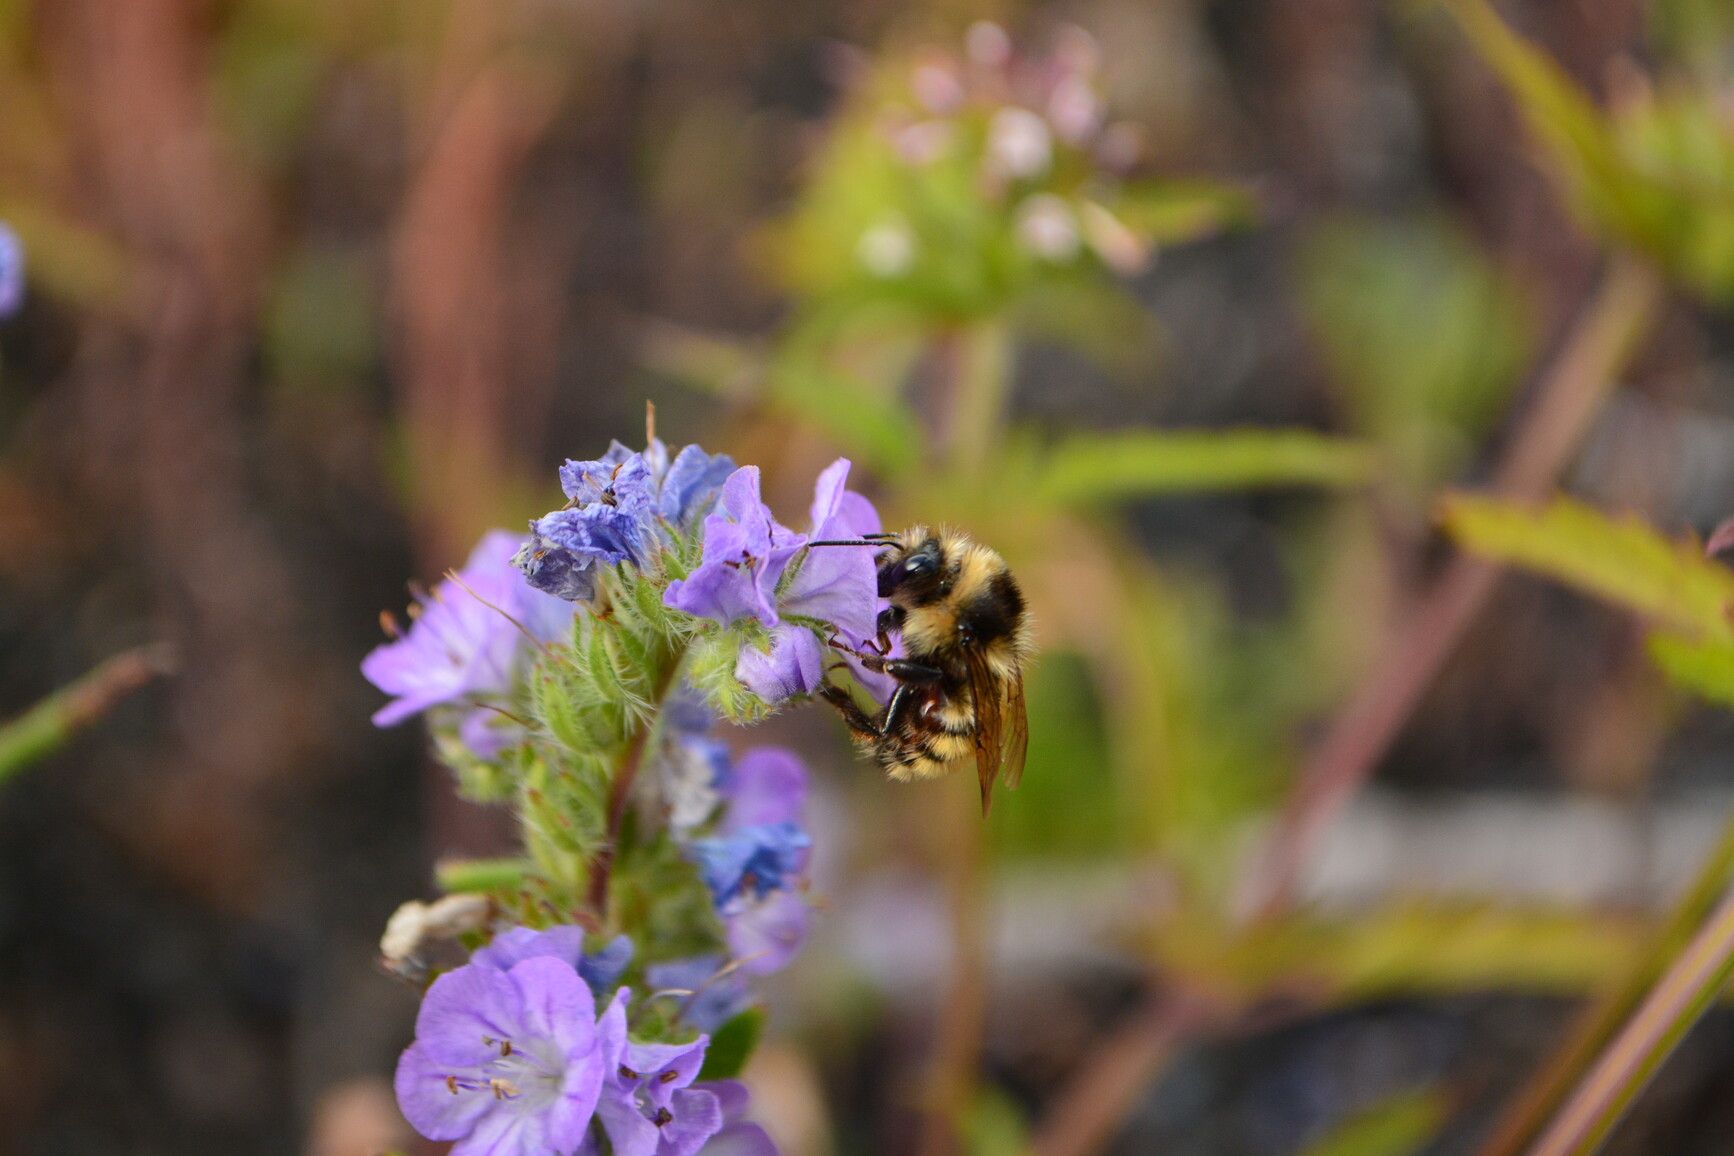 A bumblebee (Bombus) on a Linearleaf Phacelia (Phacelia linearis) in Bull Canyon Park.